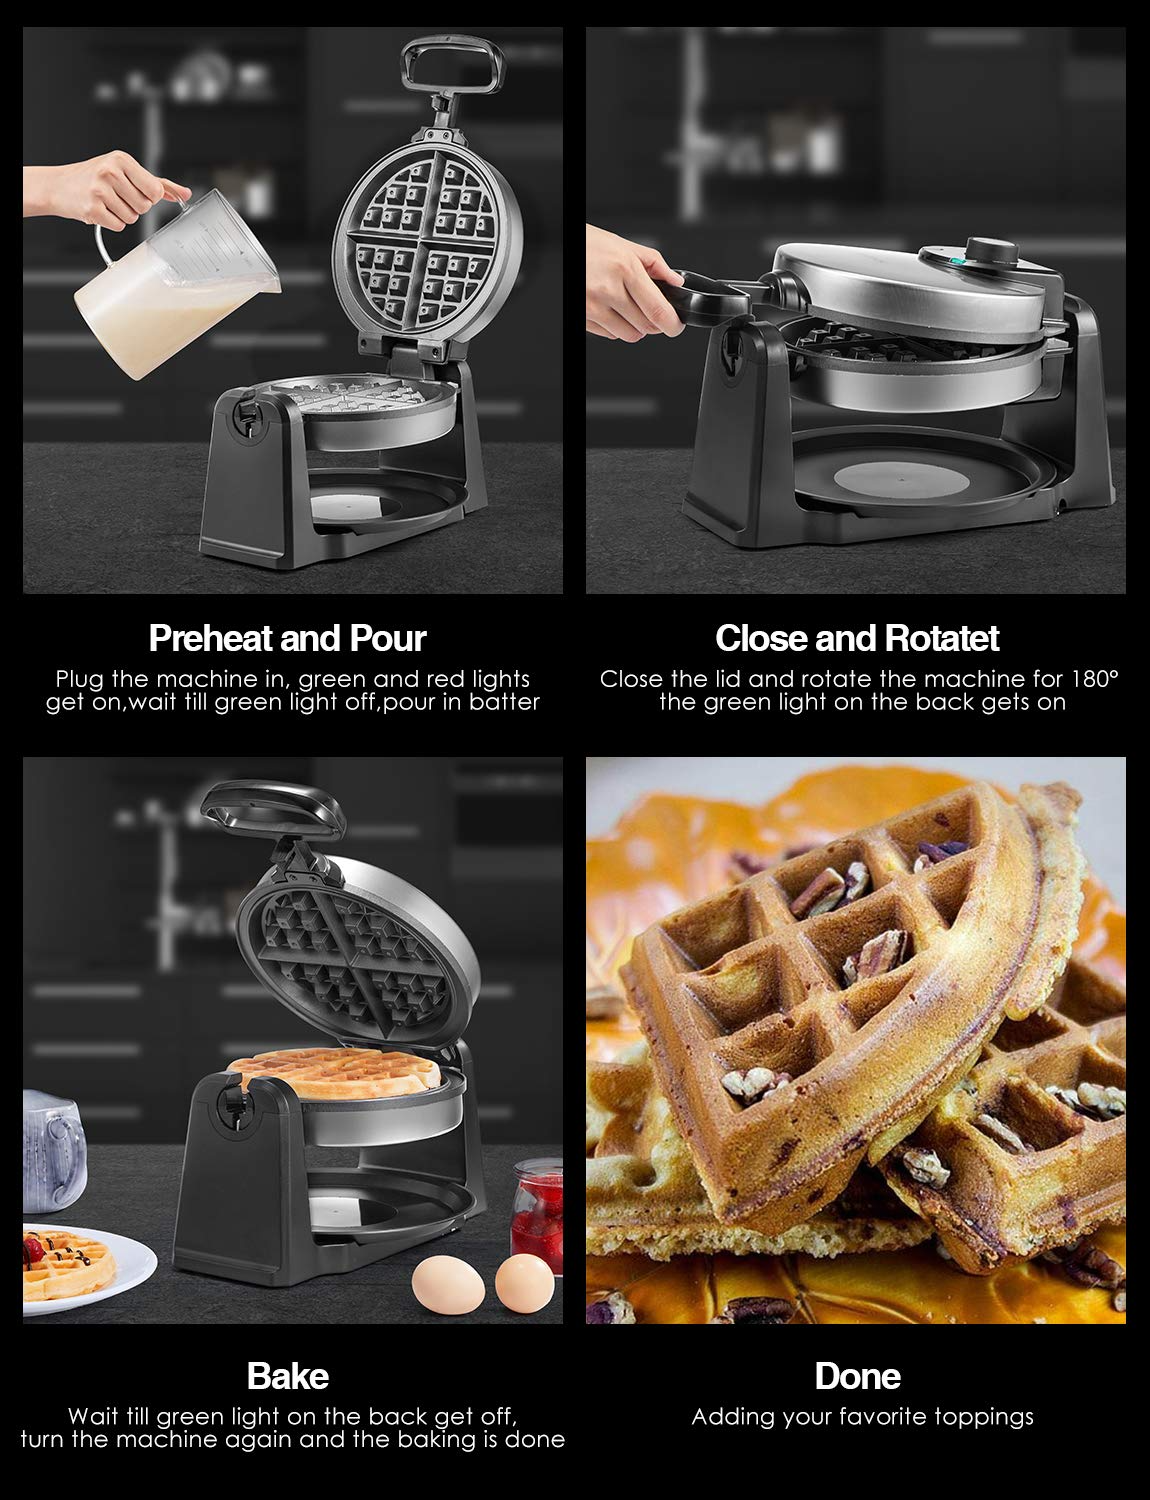 AICOOK | Classic Rotating Belgian Waffle Maker, 180° Flip Waffle Iron for Perfect 1" Thick Waffles, PFOA Free Nonstick Plates & Removable Drip Tray for Easy Clean Up, 1200W Browning Control, Stainless Steel